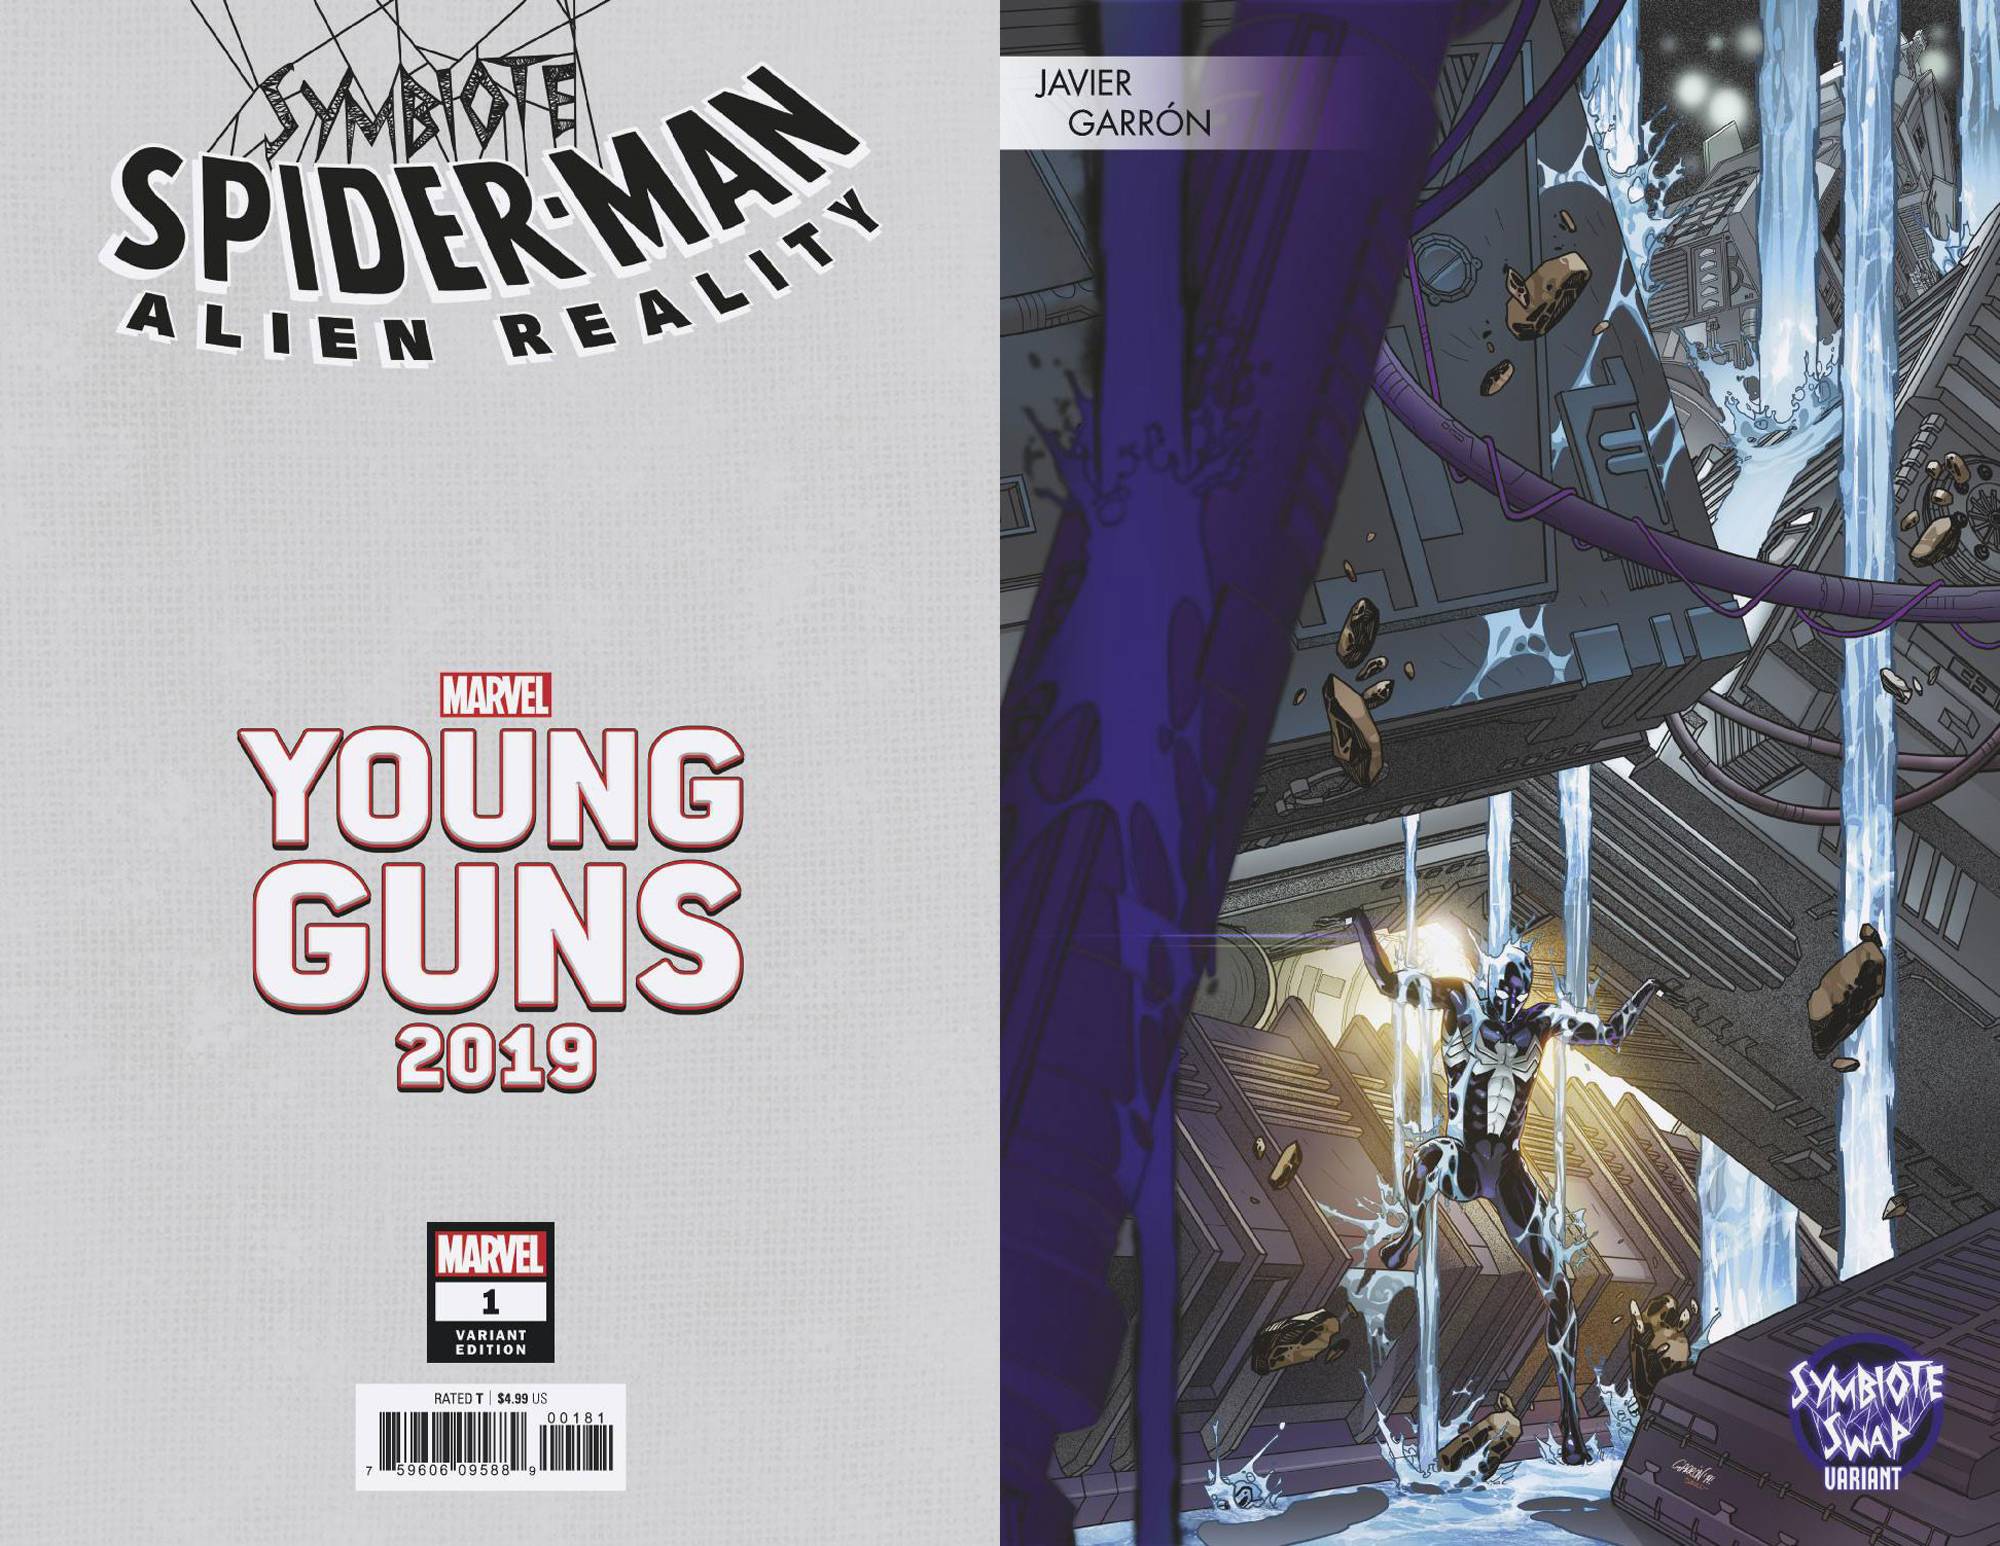 Symbiote Spider-Man Alien Reality #1 Garron Young Guns Variant (Of 5)